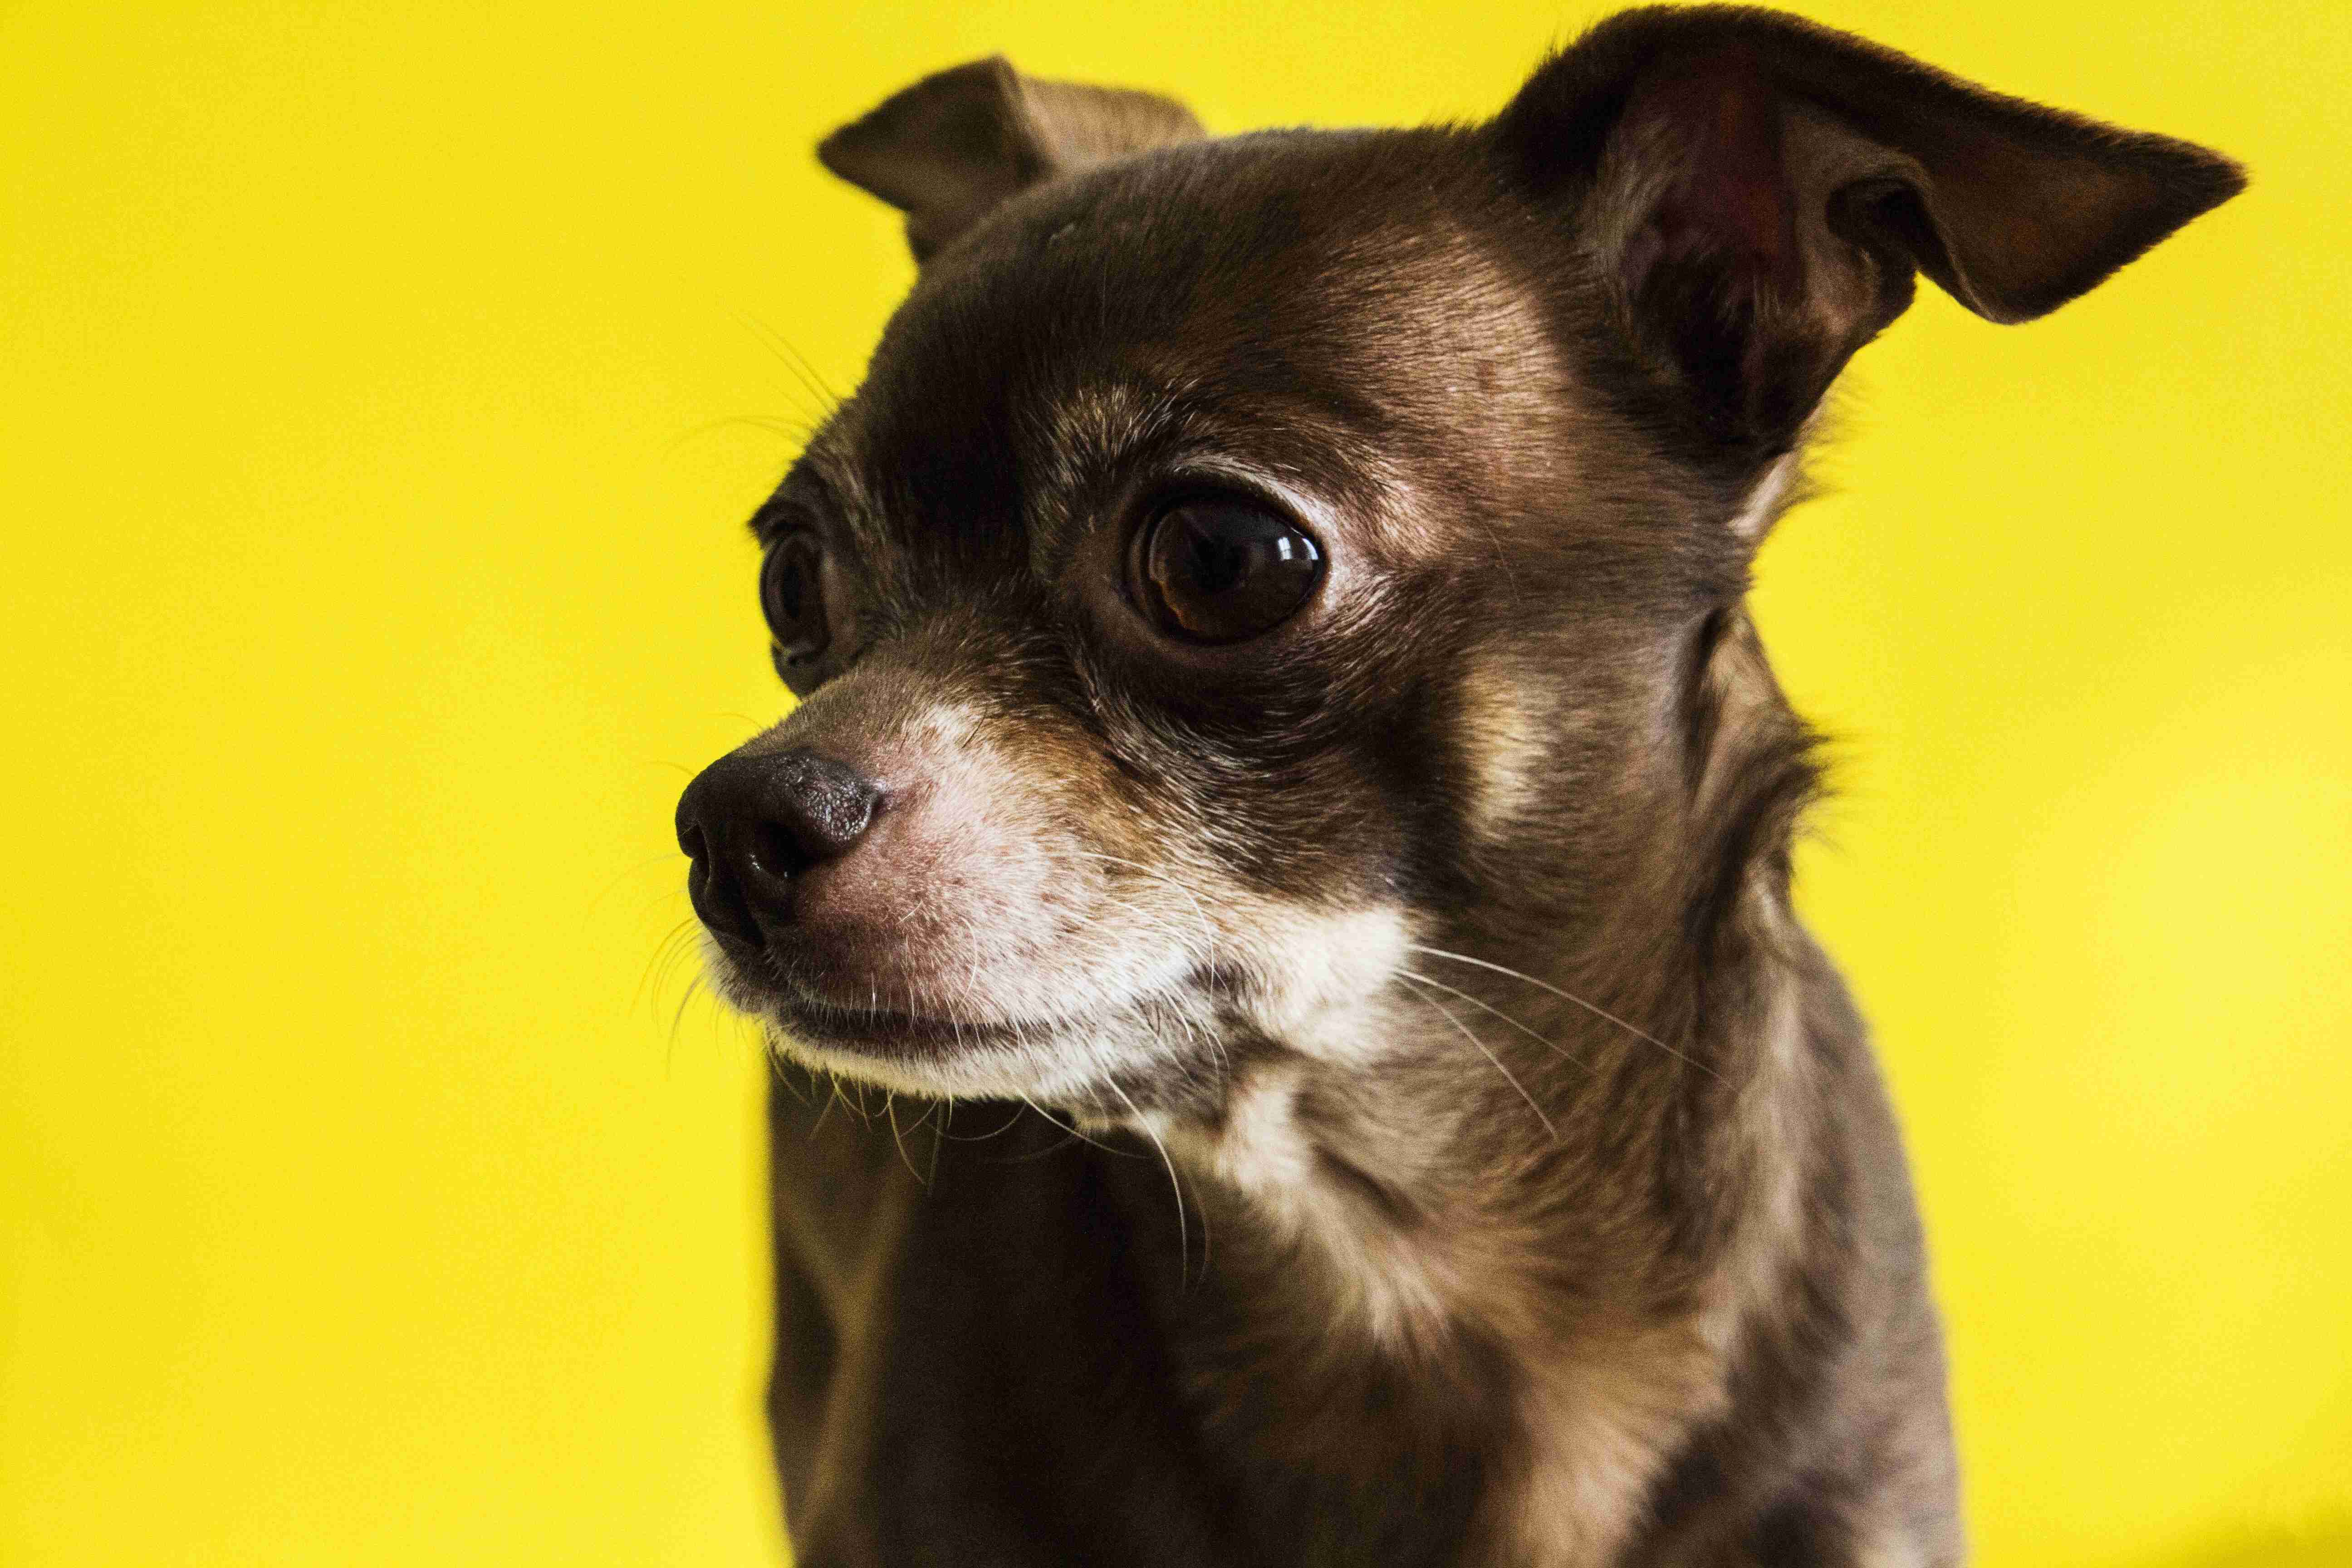 Is it safe to leave an aggressive Chihuahua alone with children or other pets?